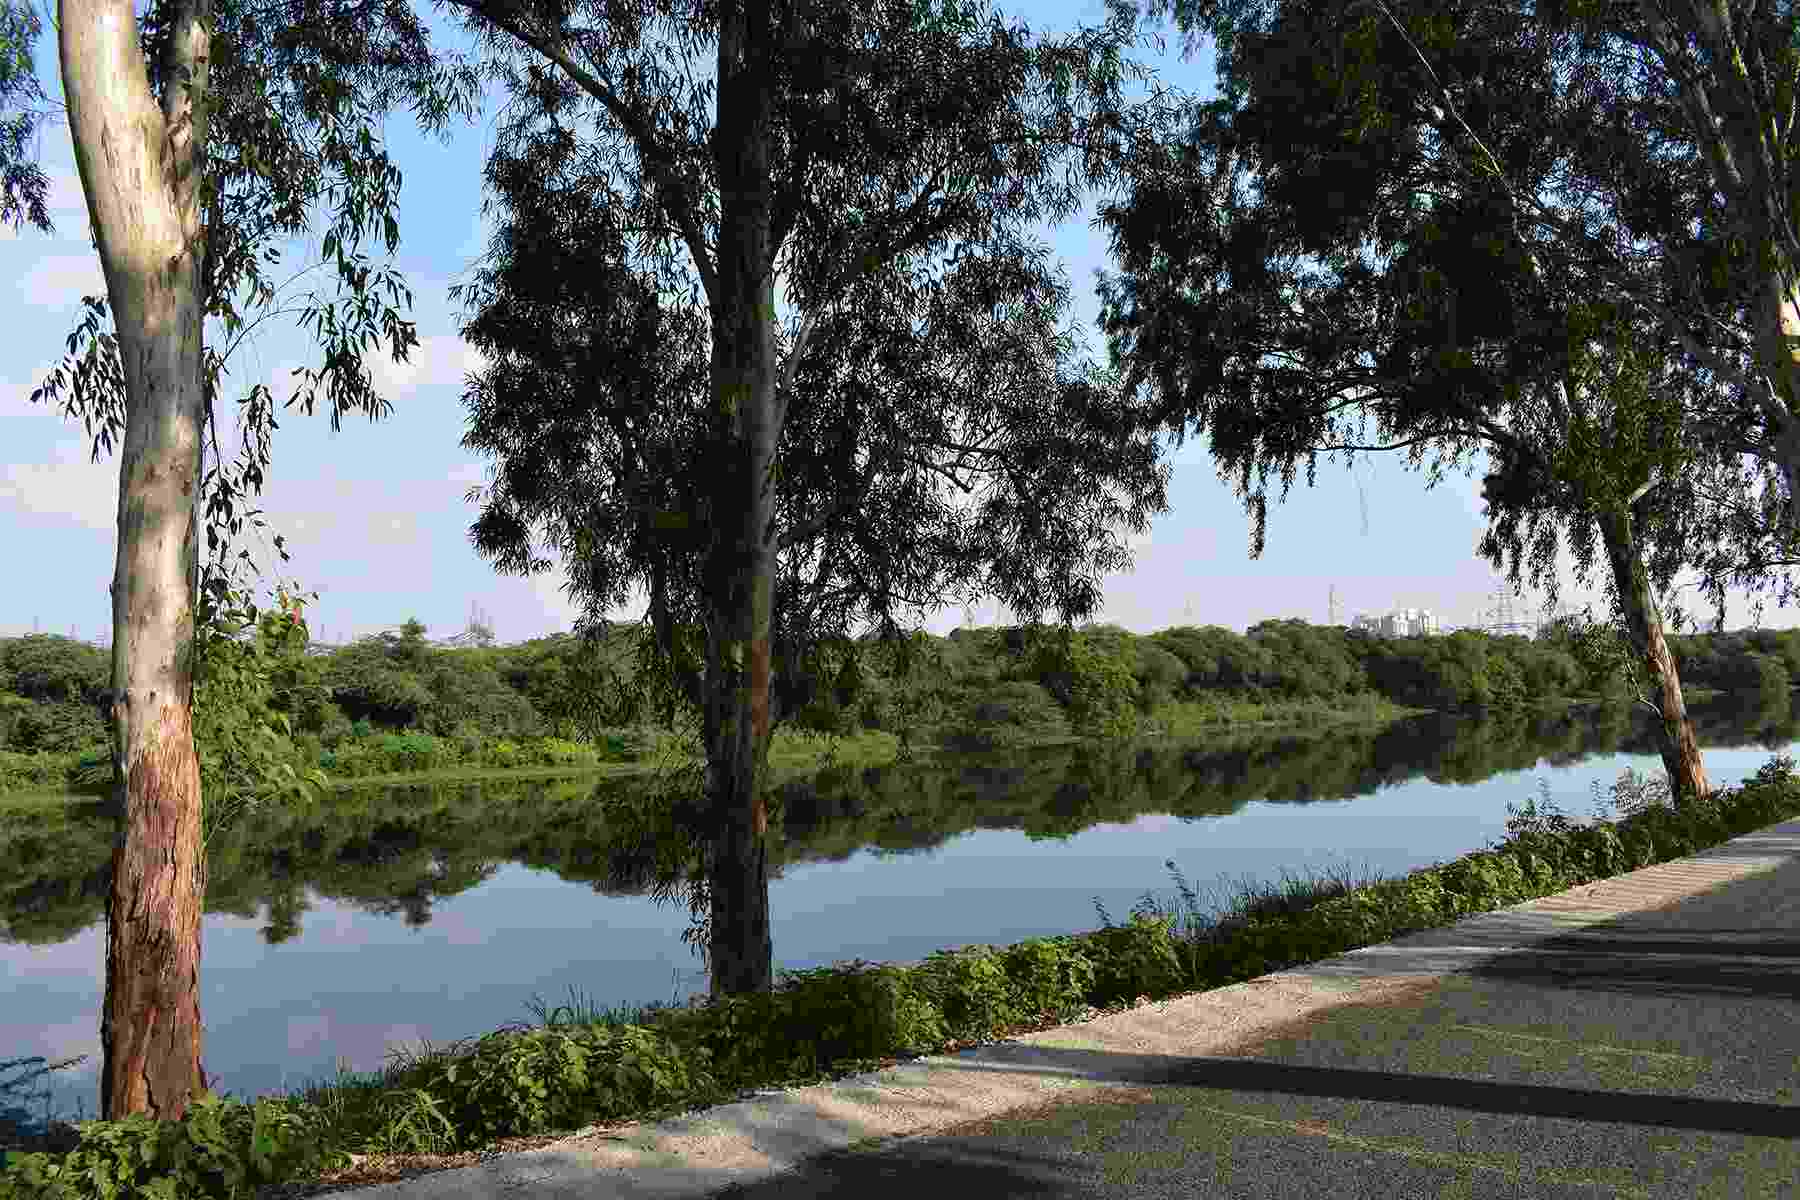 Panoramic photo of the Nazafgarh Drain, Delhi's most polluted water body, flanked by trees and with electricity pylons in the distance